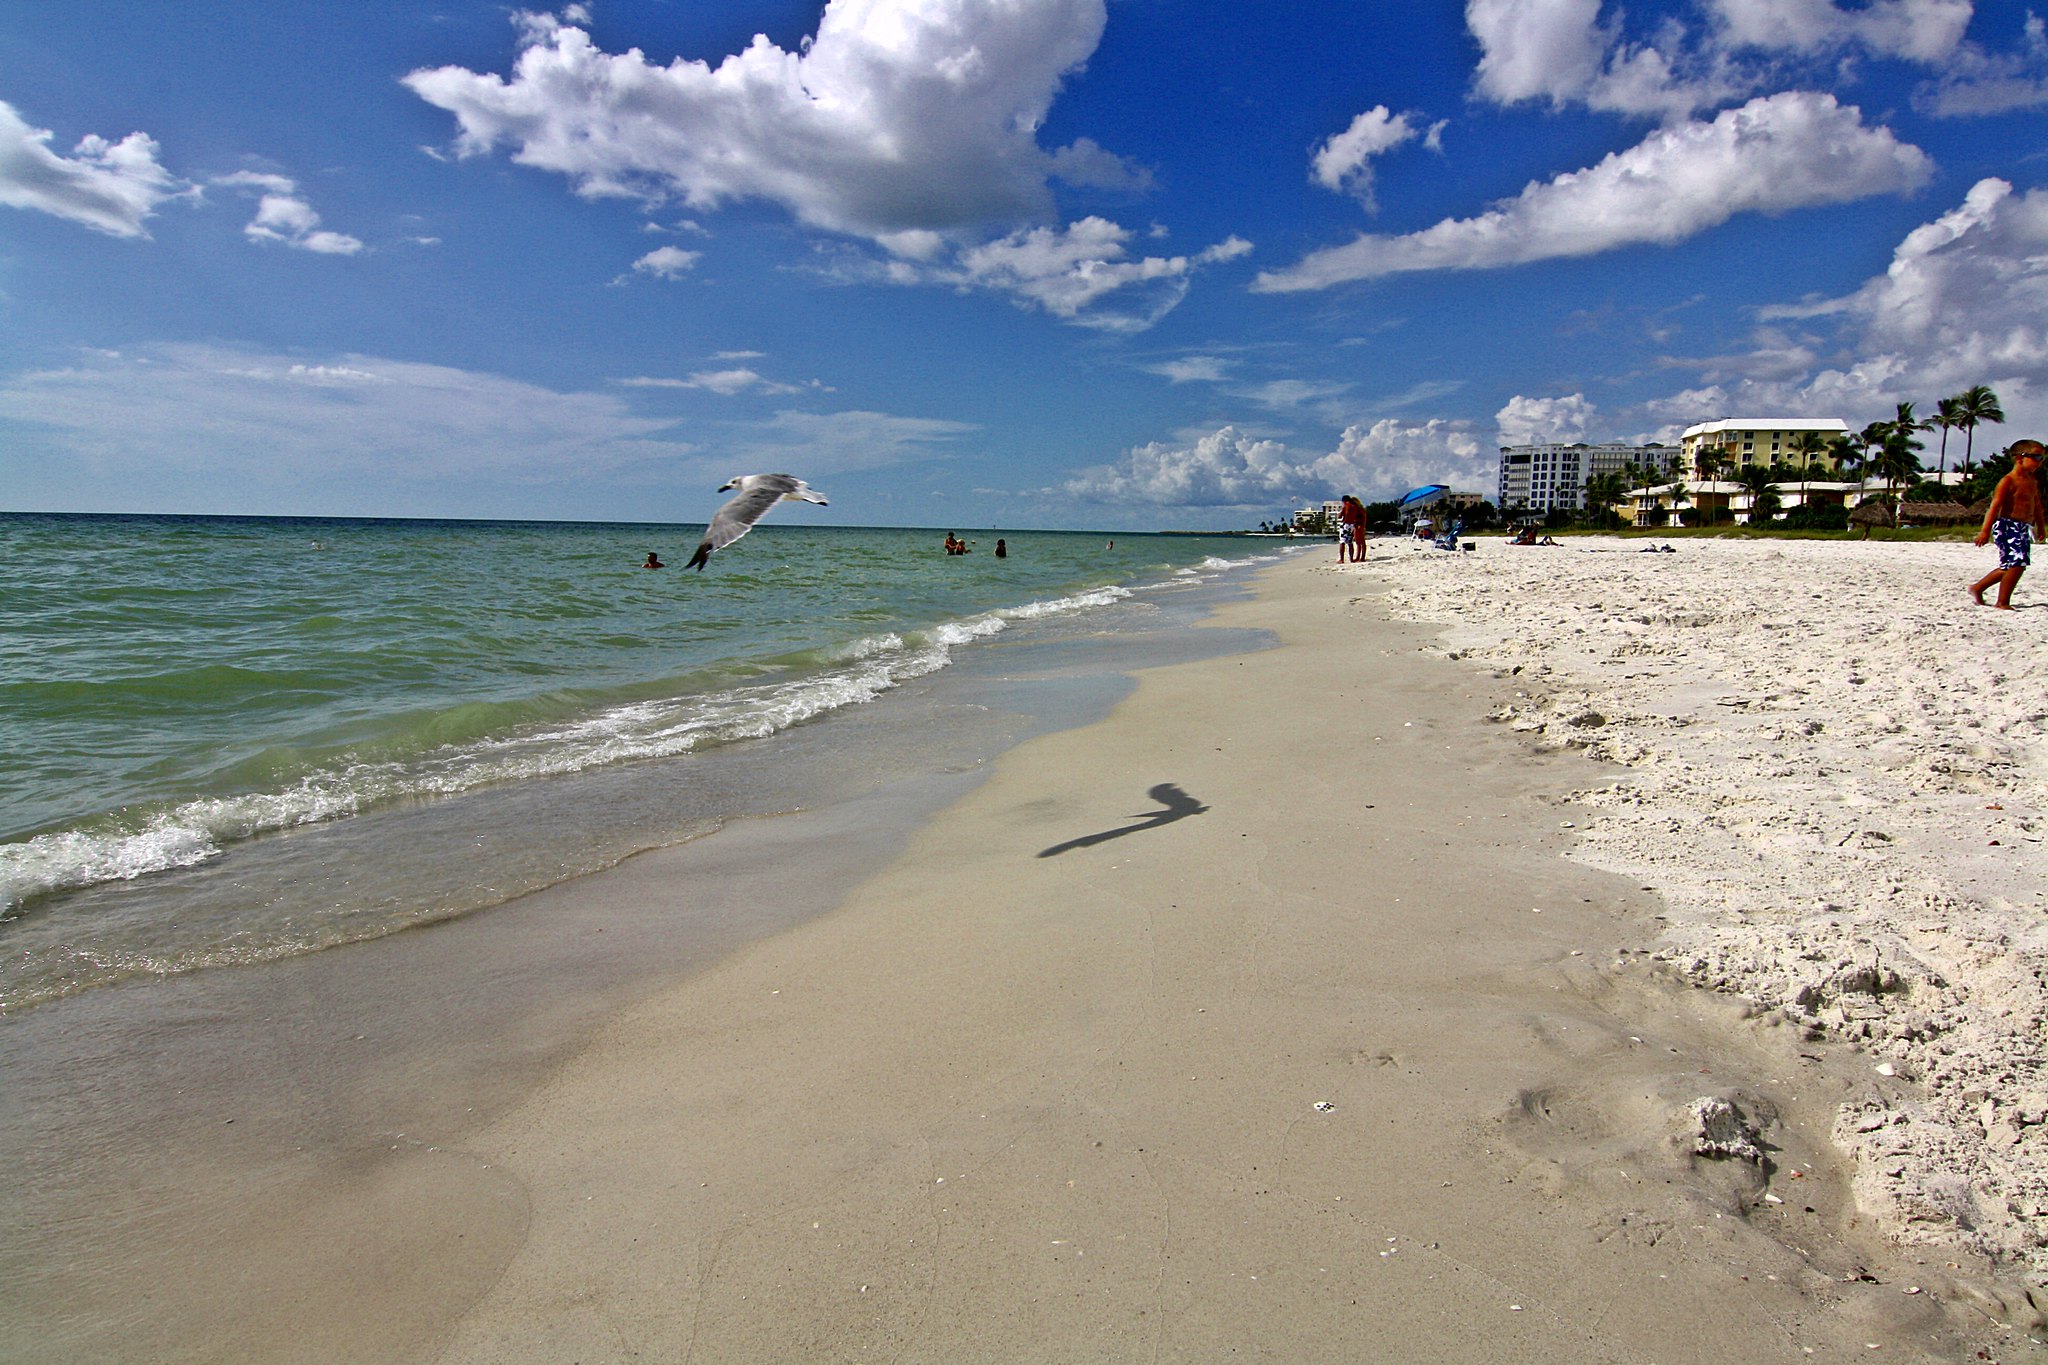 <p>Florida’s Gulf Coast is home to some of the world’s most beautiful beaches. And of all the wonderful beaches in this area, the ones in Naples are the best. </p>  <p>Aside from holidays, Naples’ beaches don’t get as crowded as others in Florida, so there’s lots of spots for you to bask in the sun and enjoy the crystal-clear waters.</p>